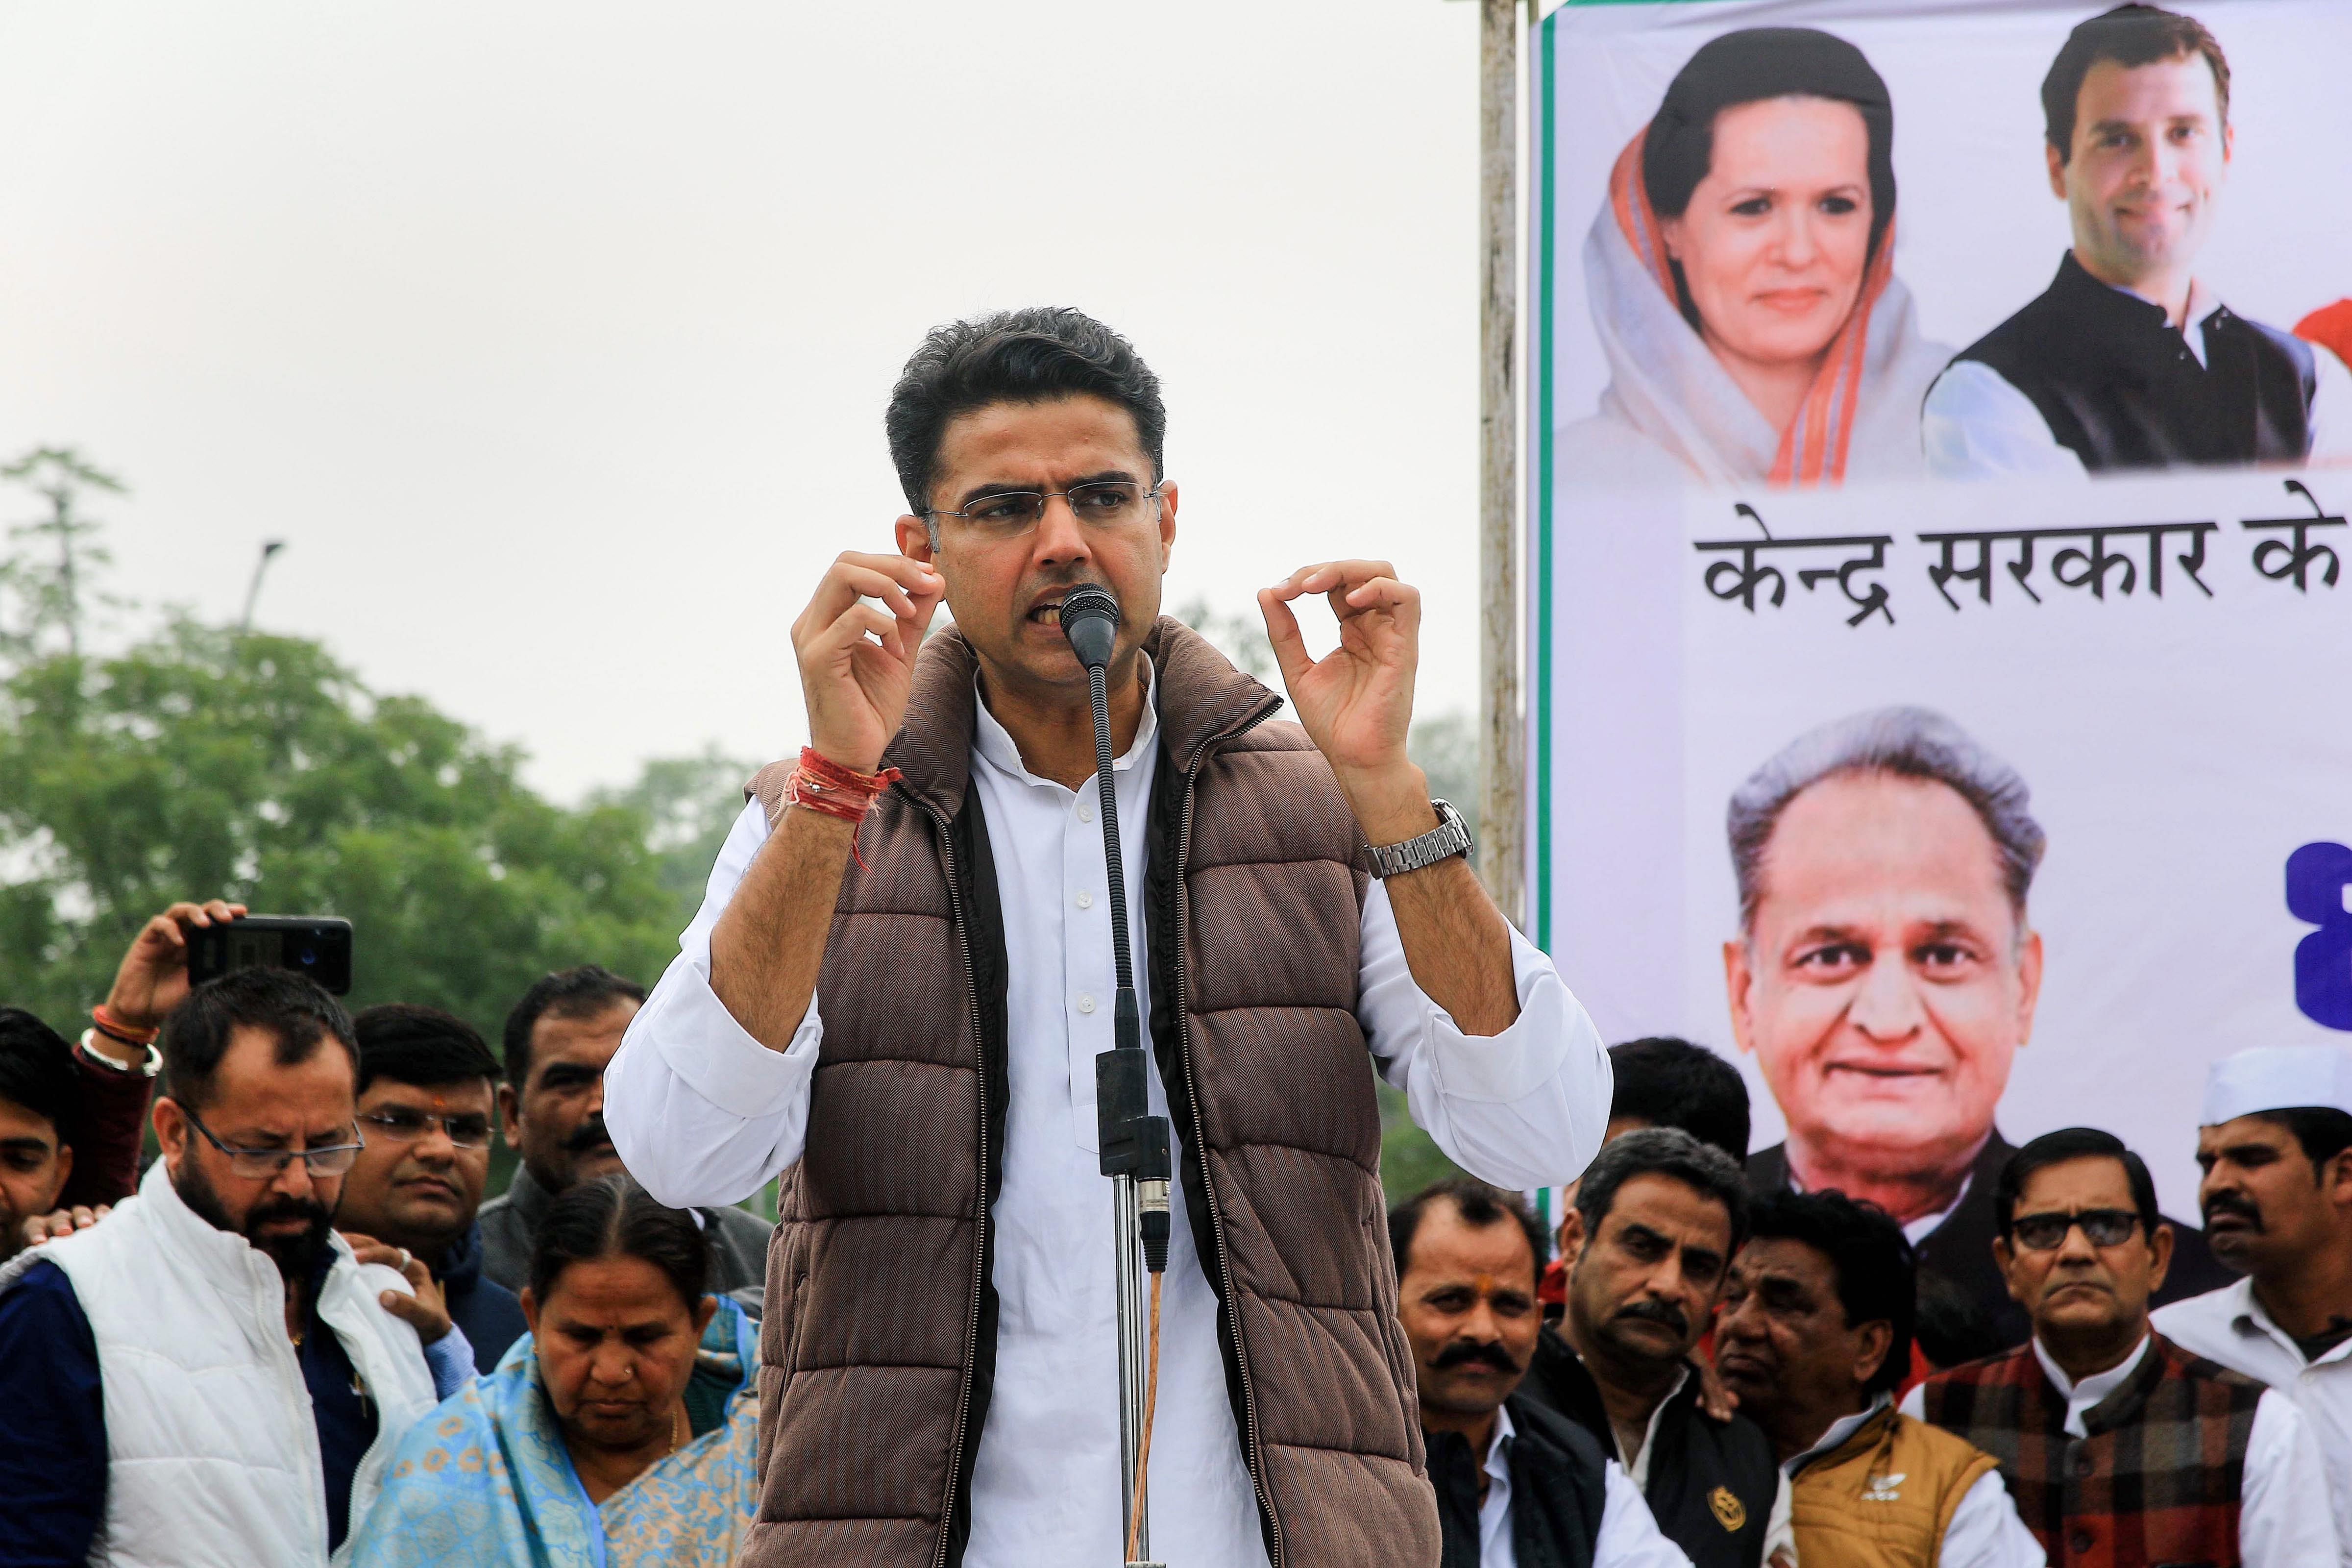 Rajasthan Deputy Chief Minister and Congress leader Sachin Pilot addresses party leaders and workers during a protest against the Citizenship Amendment Bill (CAB) at Gandhi Circle in Jaipur. (PTI Photo)